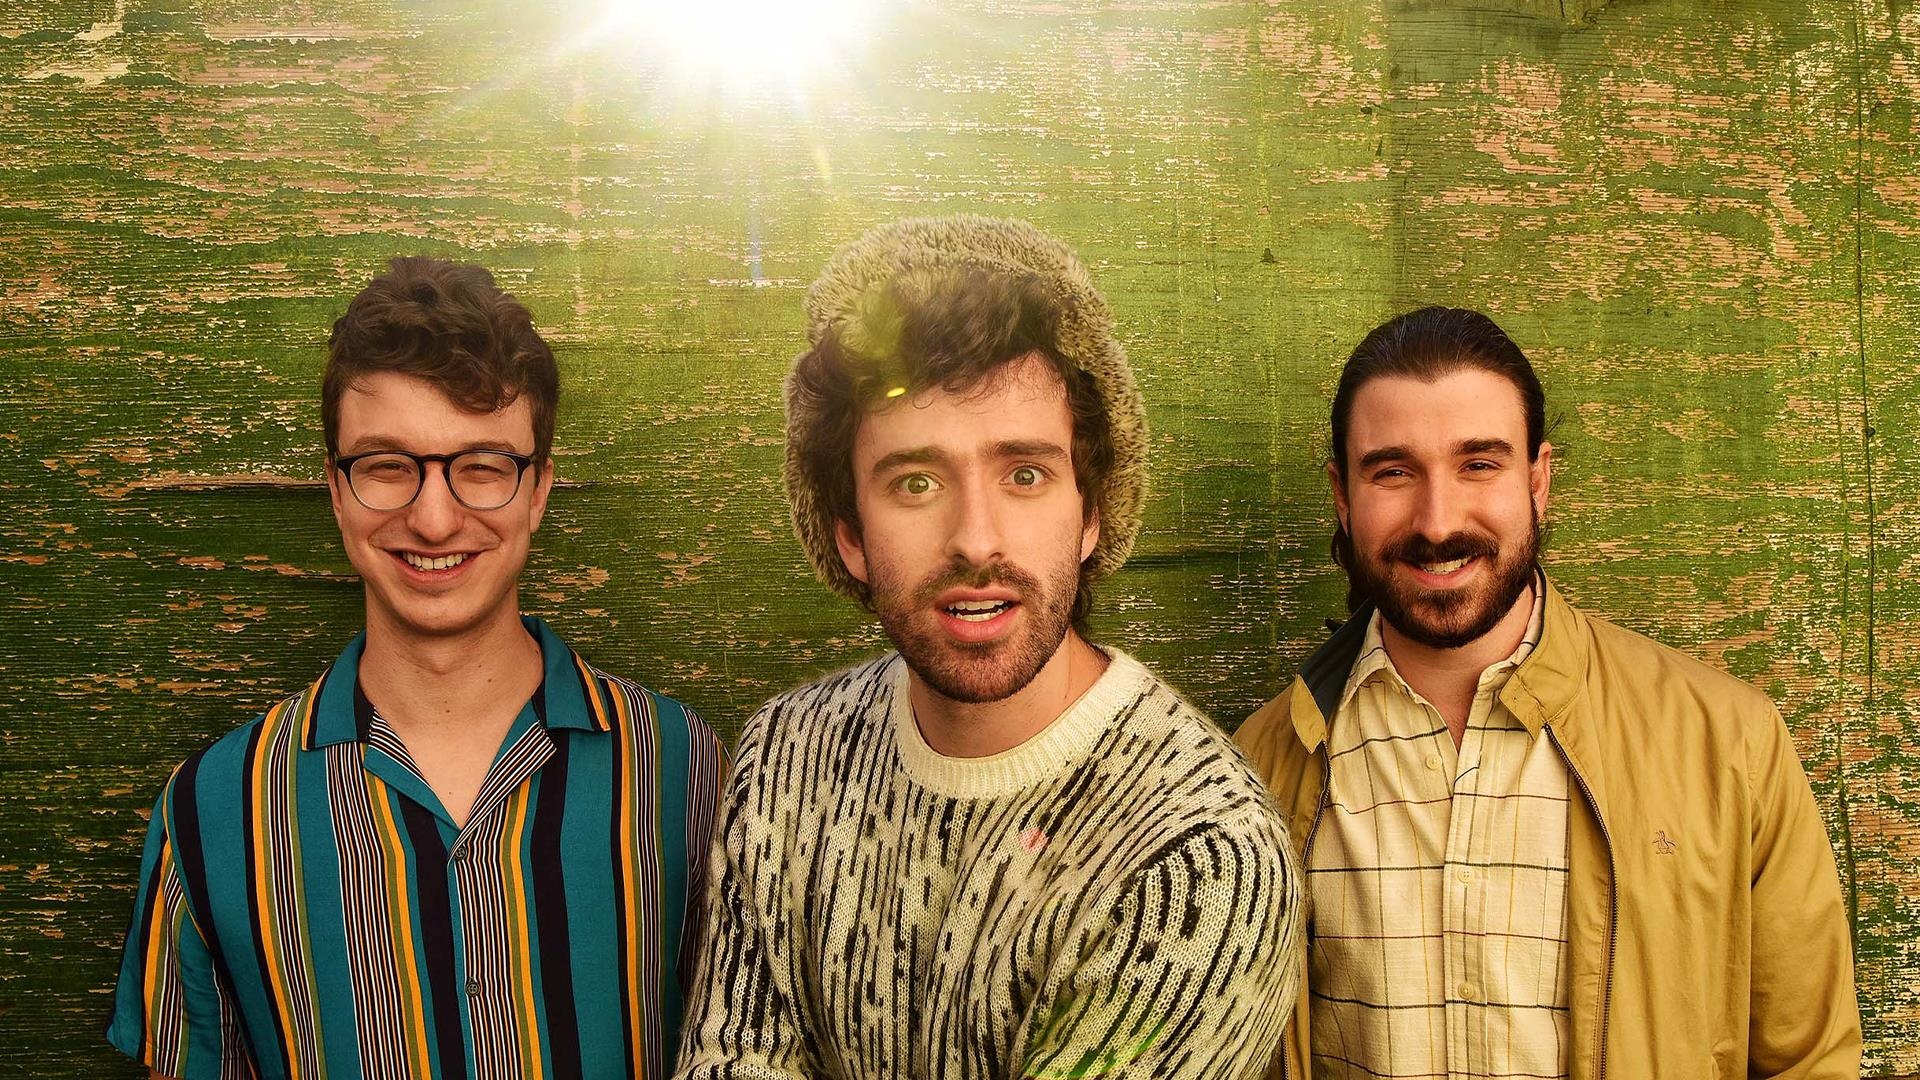 AJR concert tickets, Unmissable event, Get your tickets, Music experience, 1920x1080 Full HD Desktop